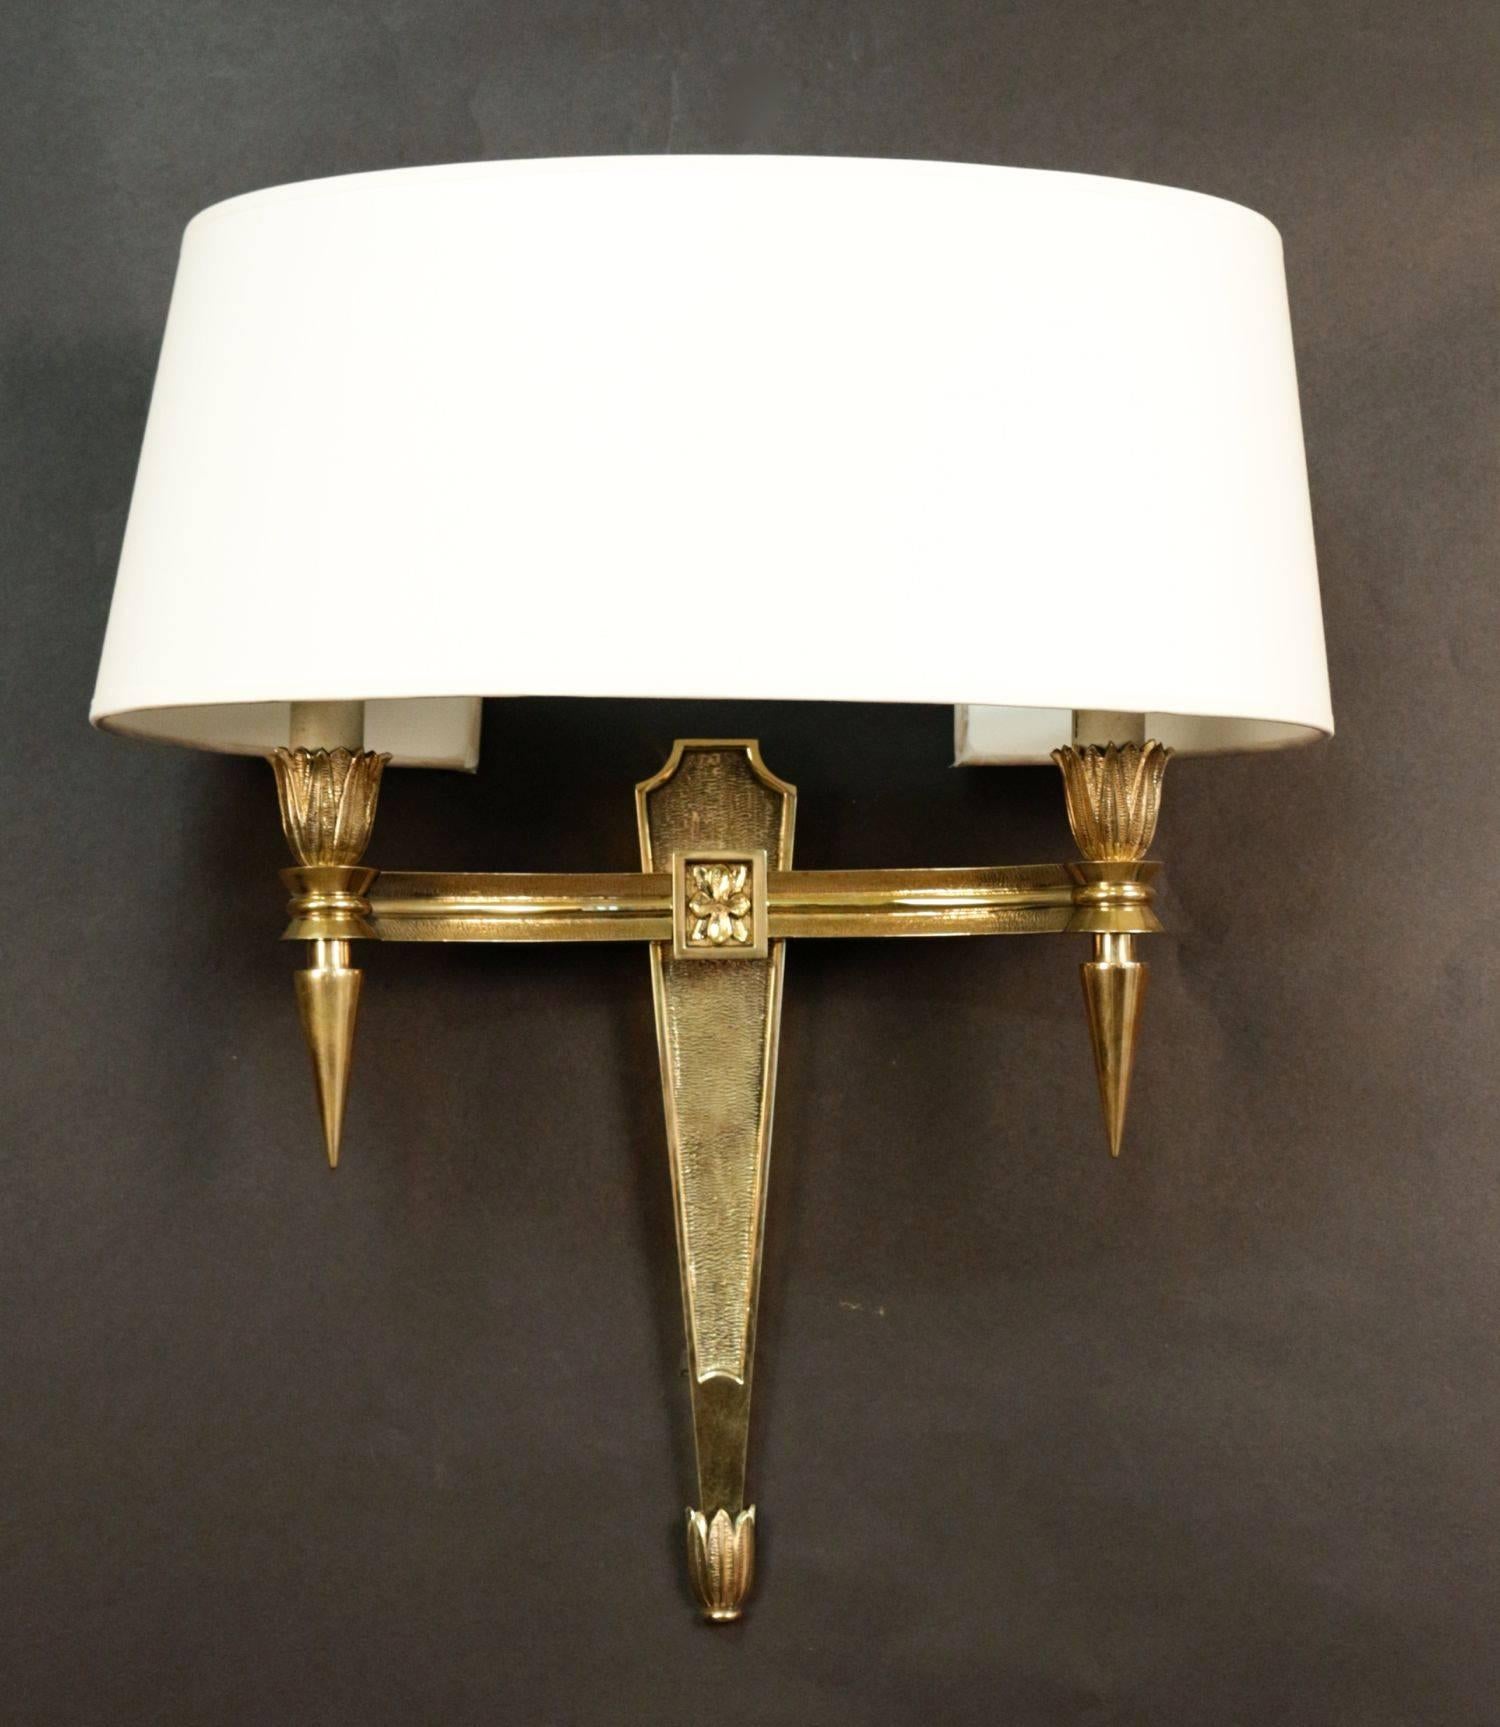 Pair of 1950s neoclassical sconces in chiseled bronze. They consist of two lighted arms with sockets endings supporting bulbs. French work. Probably by Maison Jansen. New lampshade redone according to the original. Perfect condition.